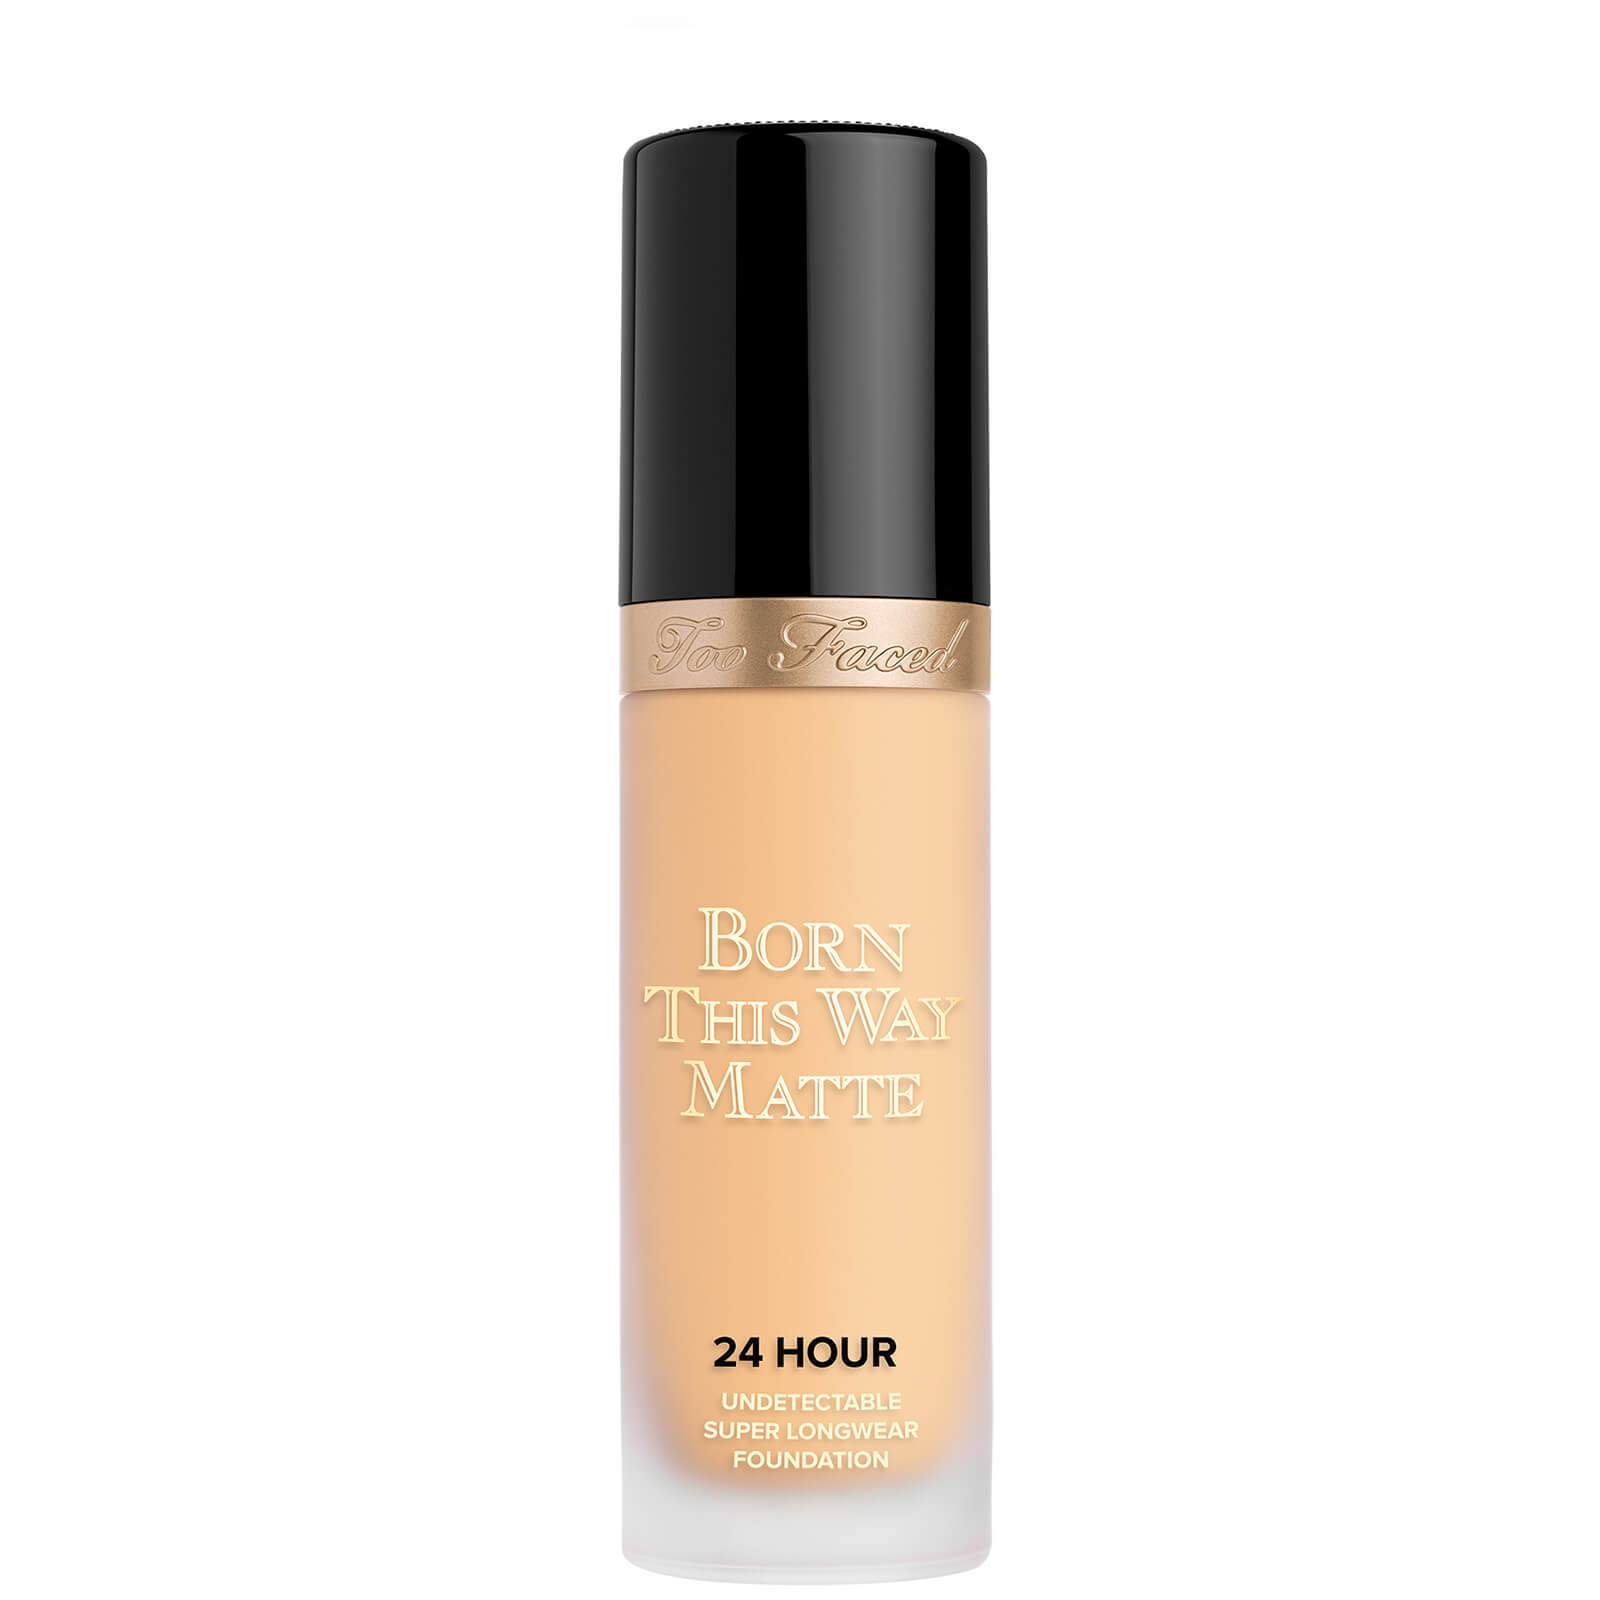 Too Faced Born This Way Matte 24 Hour Long-Wear Foundation 30ml (Various Shades) - Golden Beige